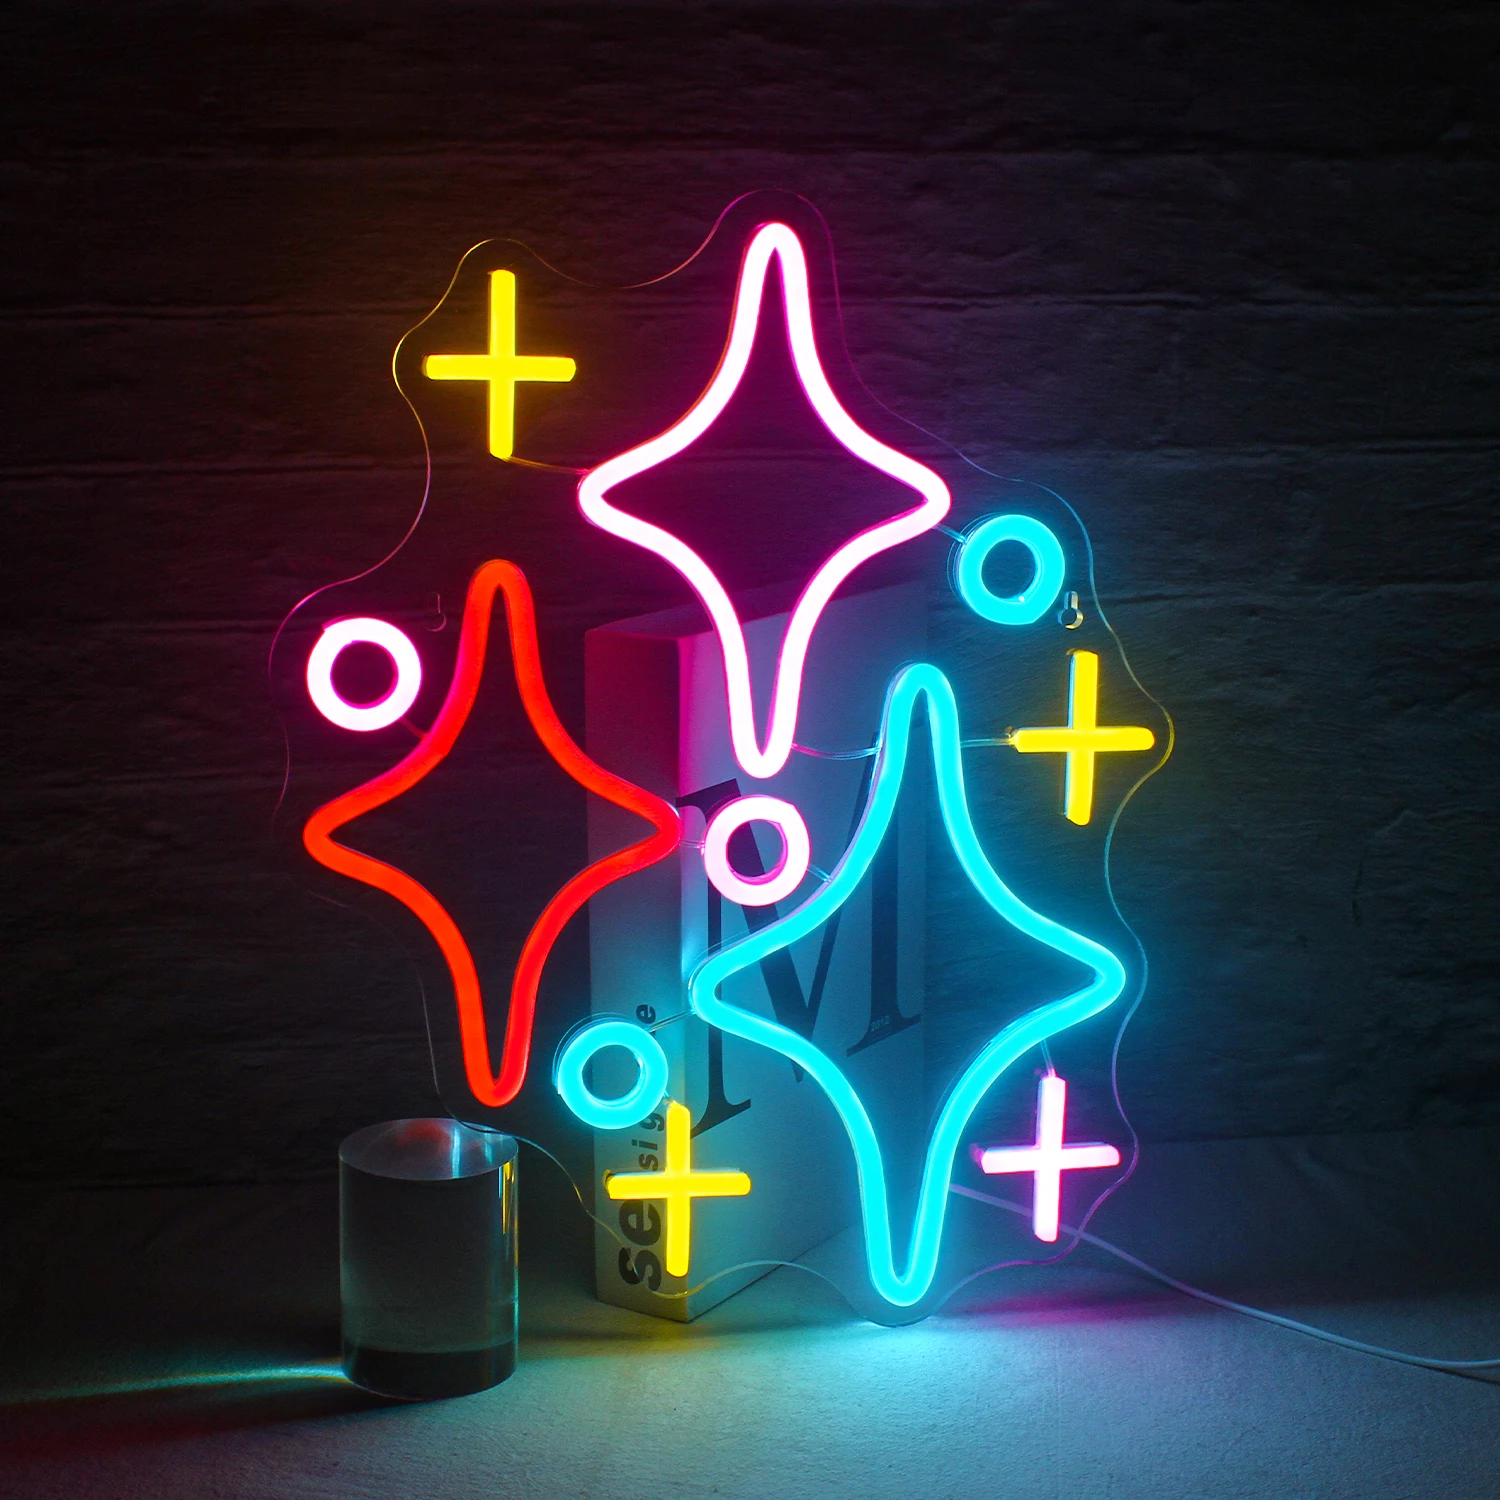 Stars Neon Sign Led Shine Star Lights Neon Signs for Wall Decor USB Powered Game Room Family Birthday Bar Wedding Party Neon personalized wedding customization neon sign lover s gift family name design plug powered outdoor decor waterproof led lights